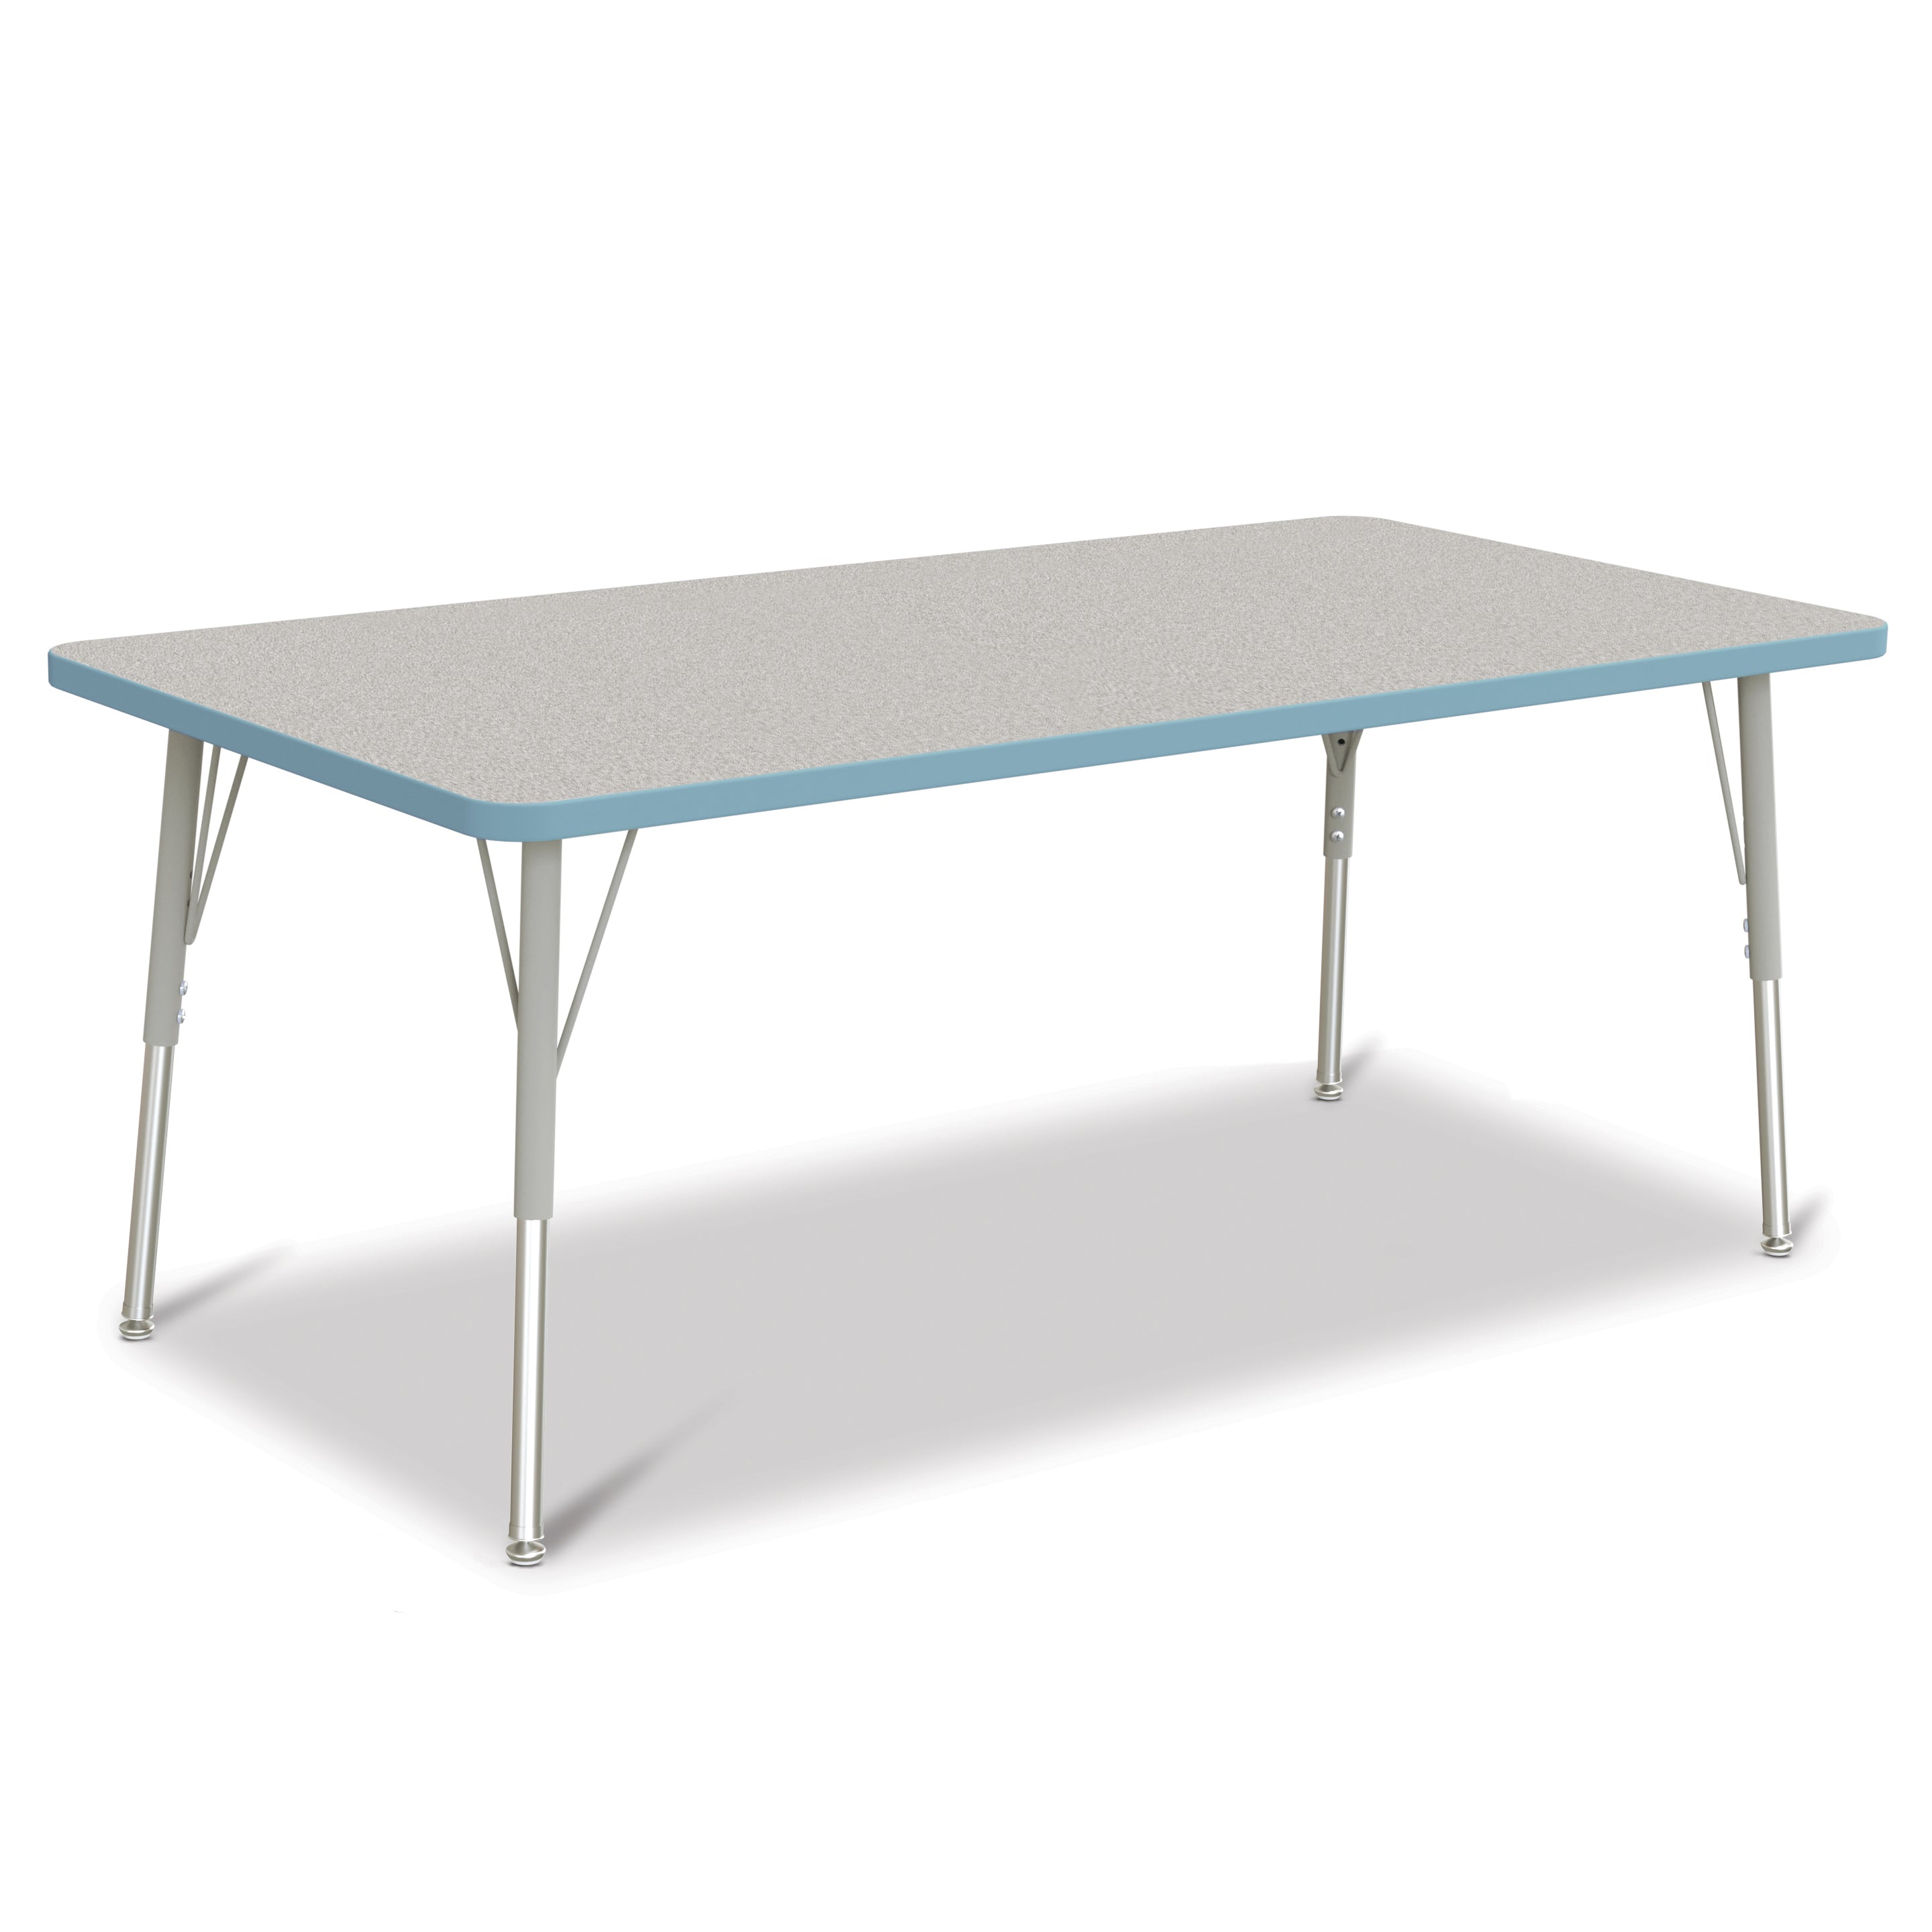 6408JCA131, Berries Rectangle Activity Table - 30" X 60", A-height - Freckled Gray/Coastal Blue/Gray